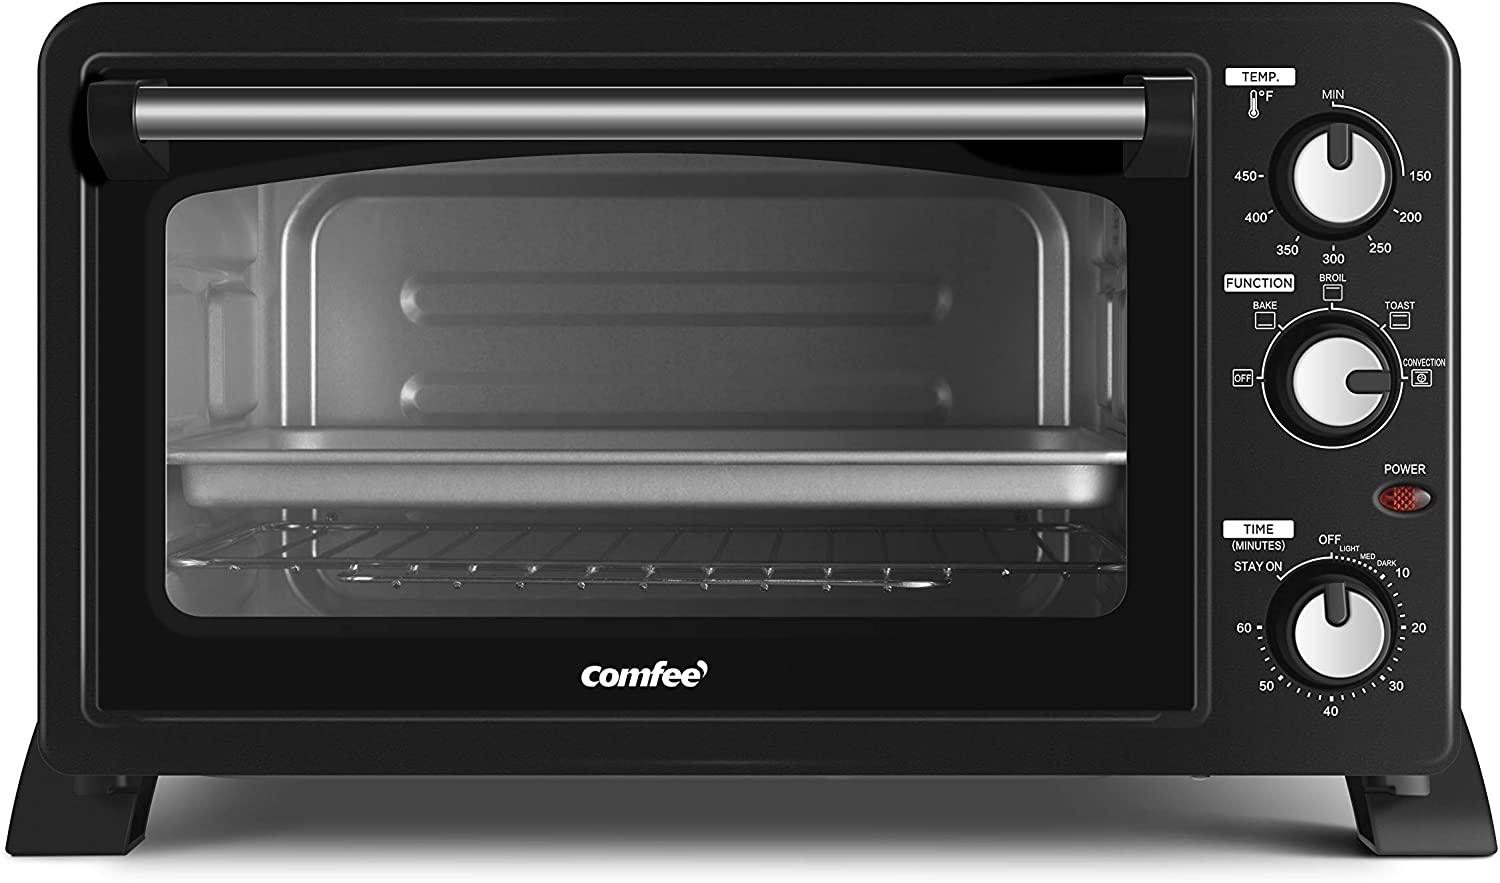 COMFEE' CFO-CC2501C 6-Slice Toaster Oven Countertop with Convection, 1500W, Broil-Toast Setting, Includes Pan, Baking Rack and Crumb Tray, Black 25L